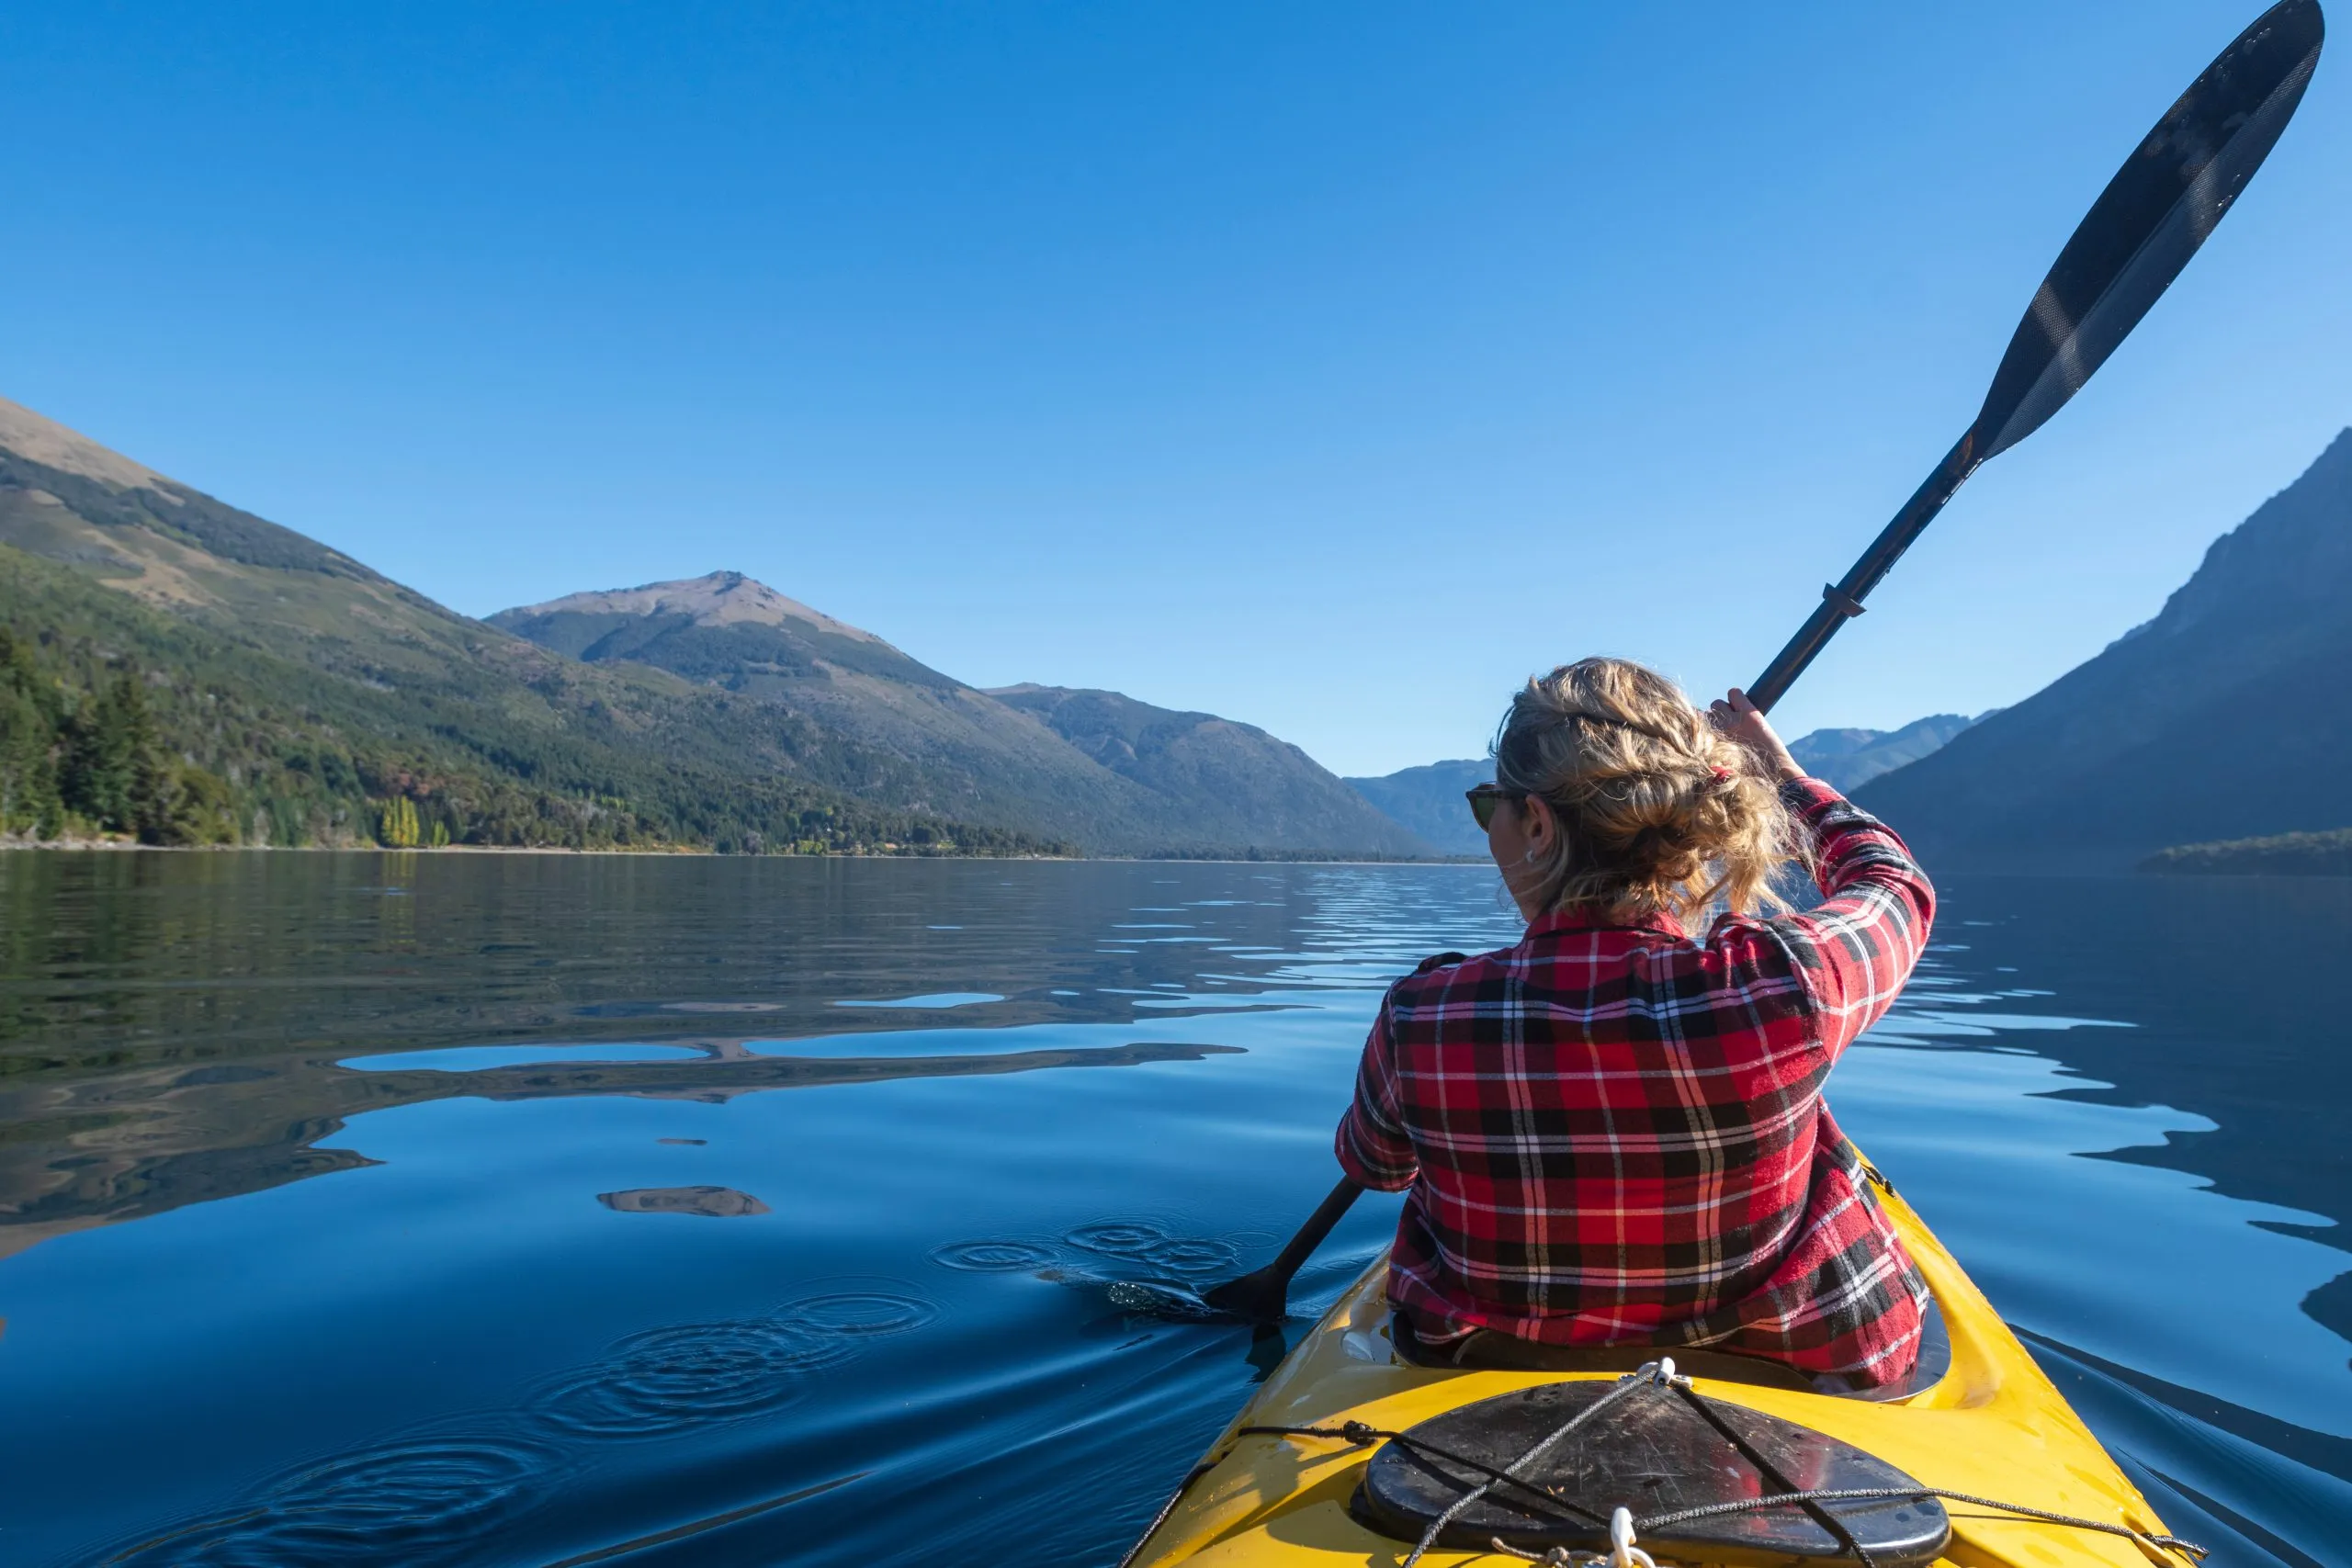 Young woman paddling a kayak touring the lakes of the National Park. Patagonia, Argentina.